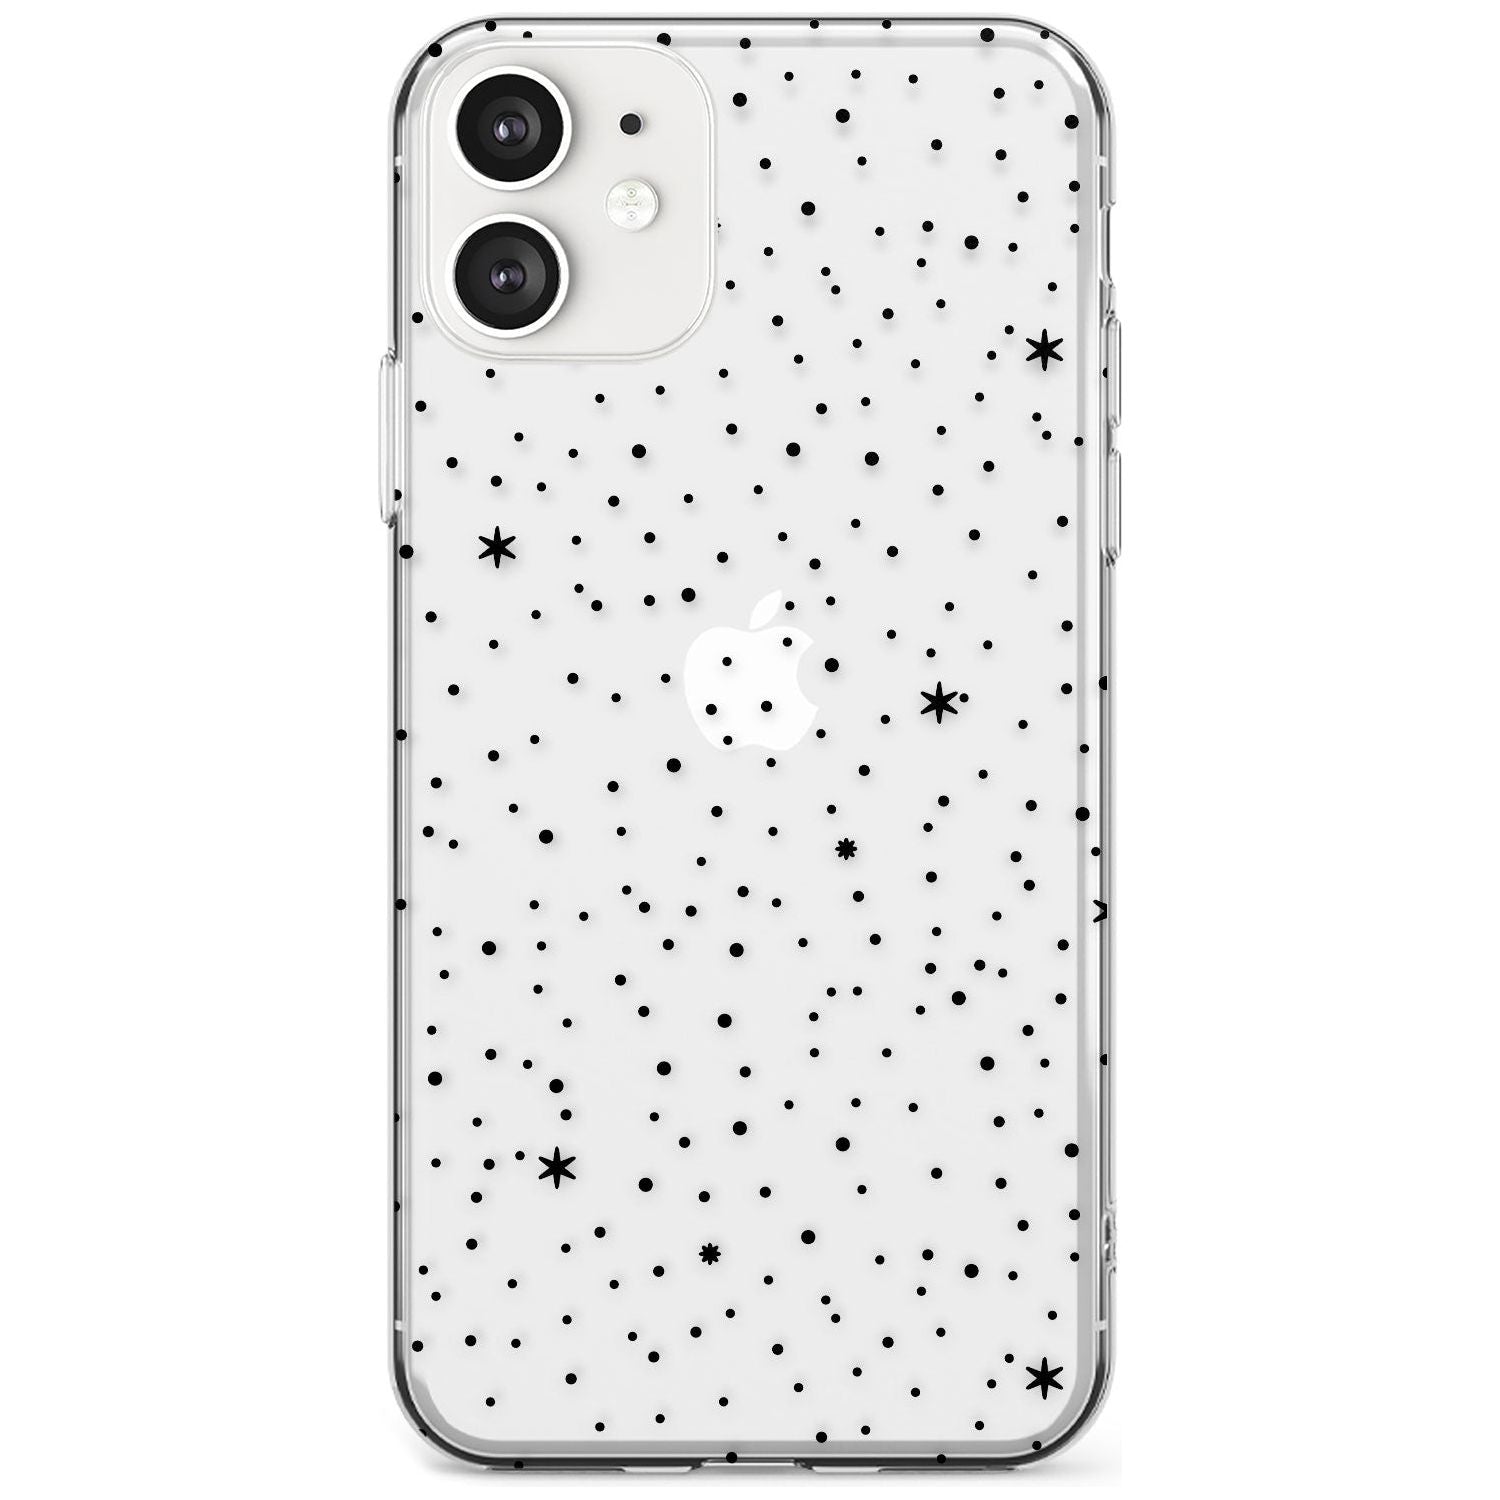 Celestial Starry Sky Black Impact Phone Case for iPhone 11